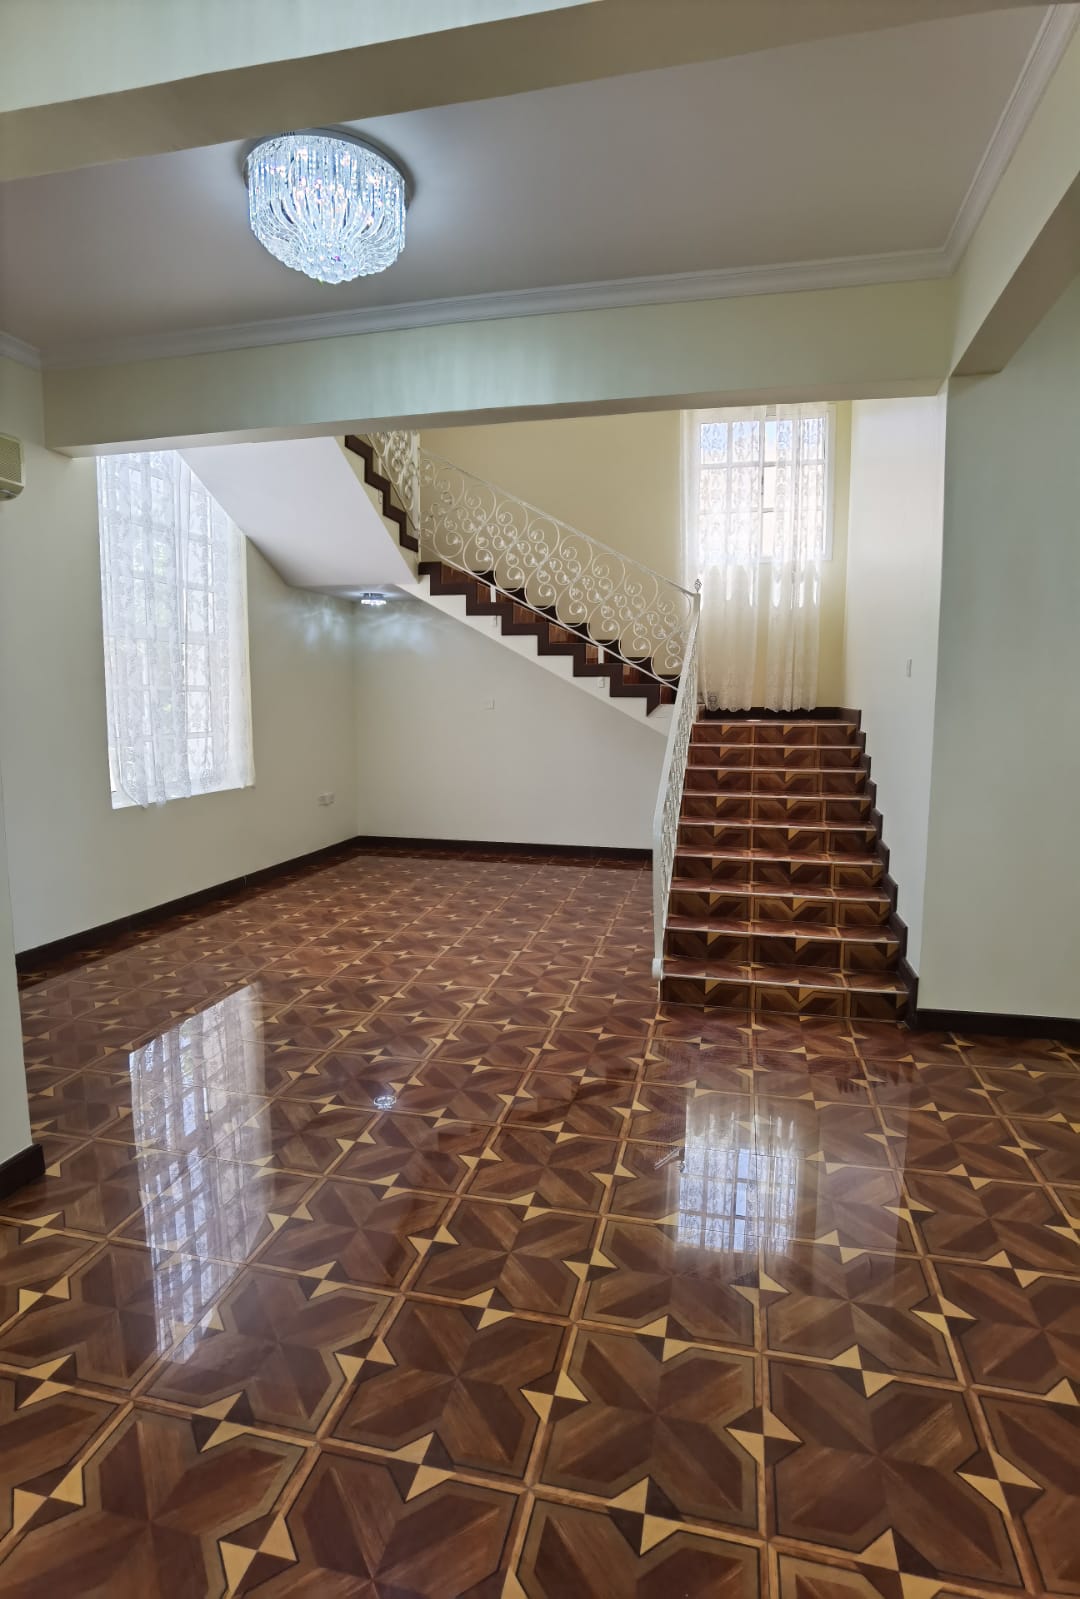 For Rent A Villa In Maqaba